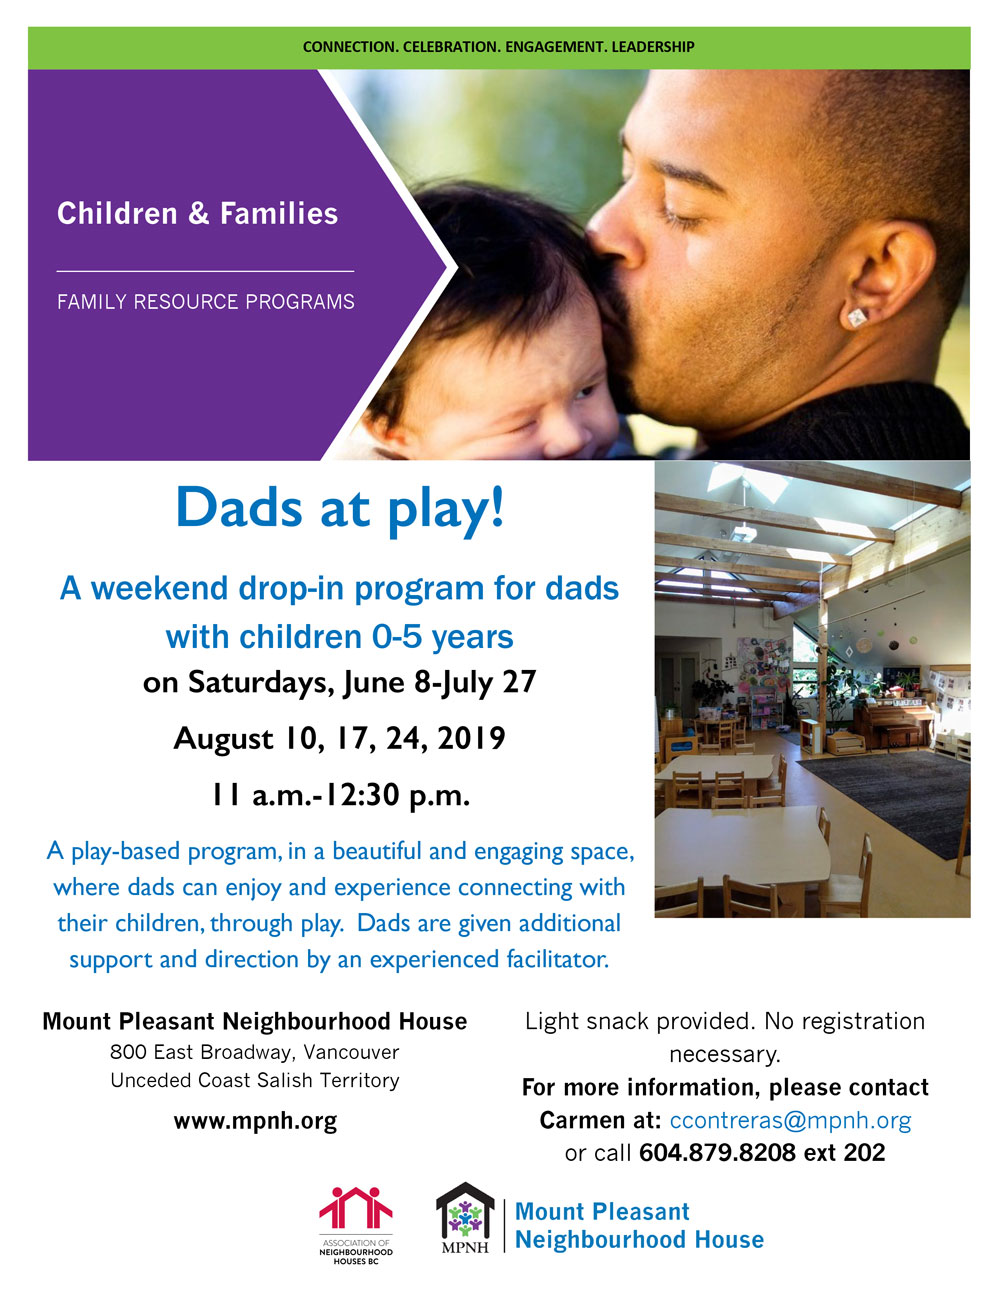 An image of the program poster with event details, featuring a photo of the preschool space and a picture of a dad kissing his baby's head